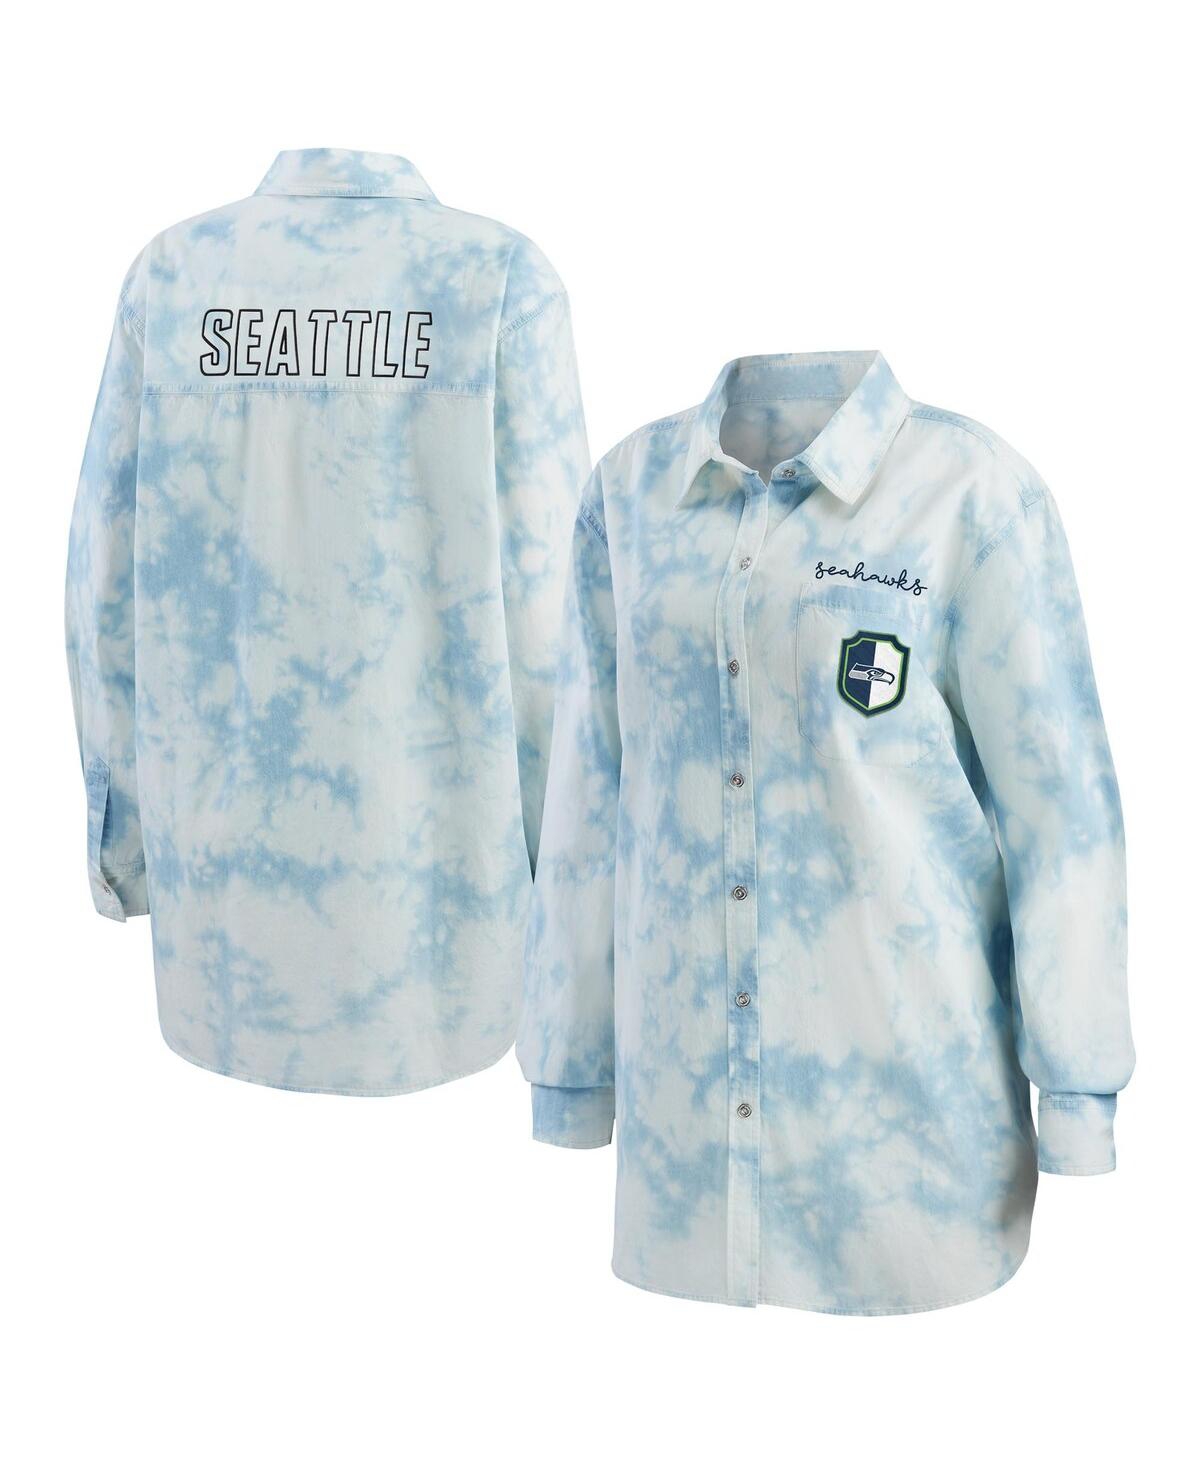 WEAR BY ERIN ANDREWS WOMEN'S DENIM SEATTLE SEAHAWKS CHAMBRAY ACID-WASHED LONG SLEEVE BUTTON-UP SHIRT